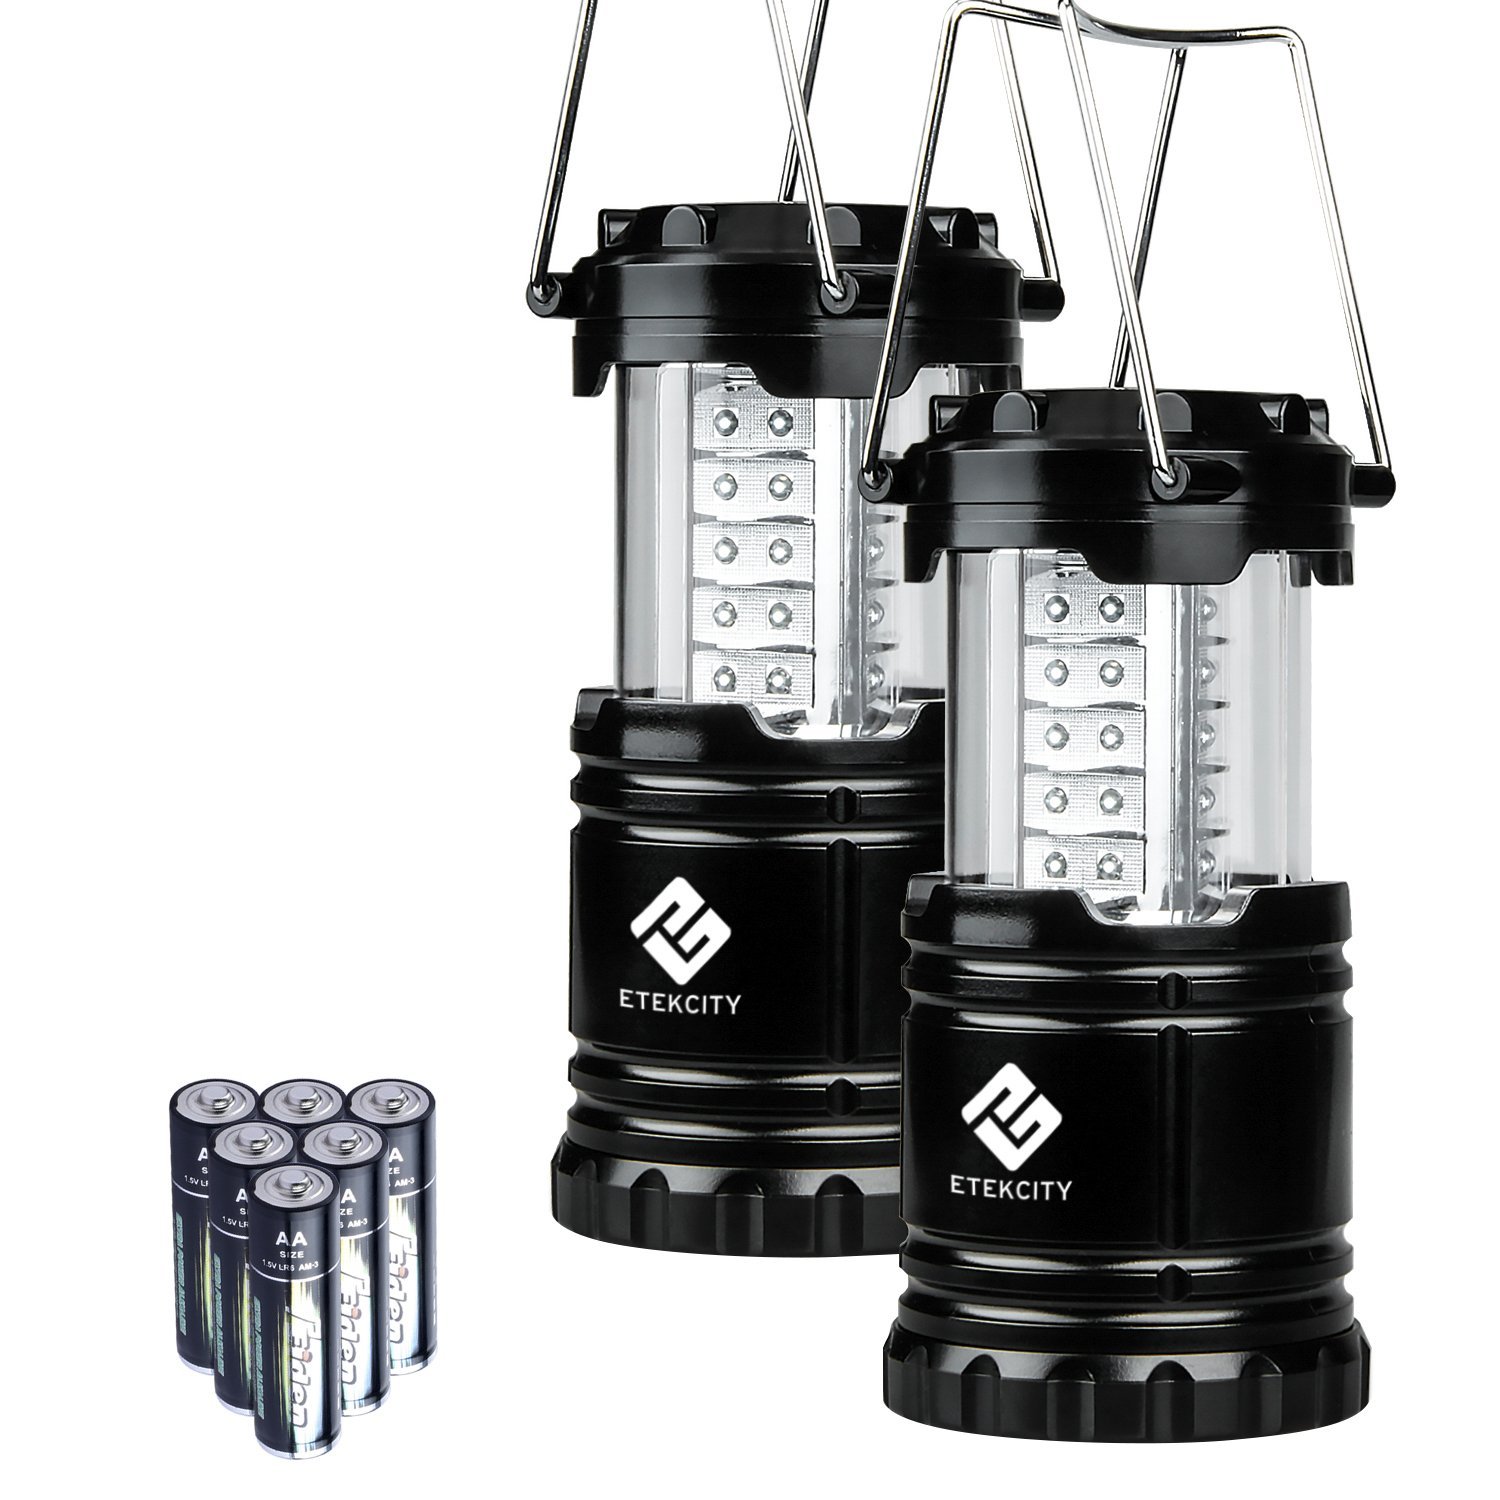 Portable Outdoor Led Camping Lantern 2 Pack 1345 From 40